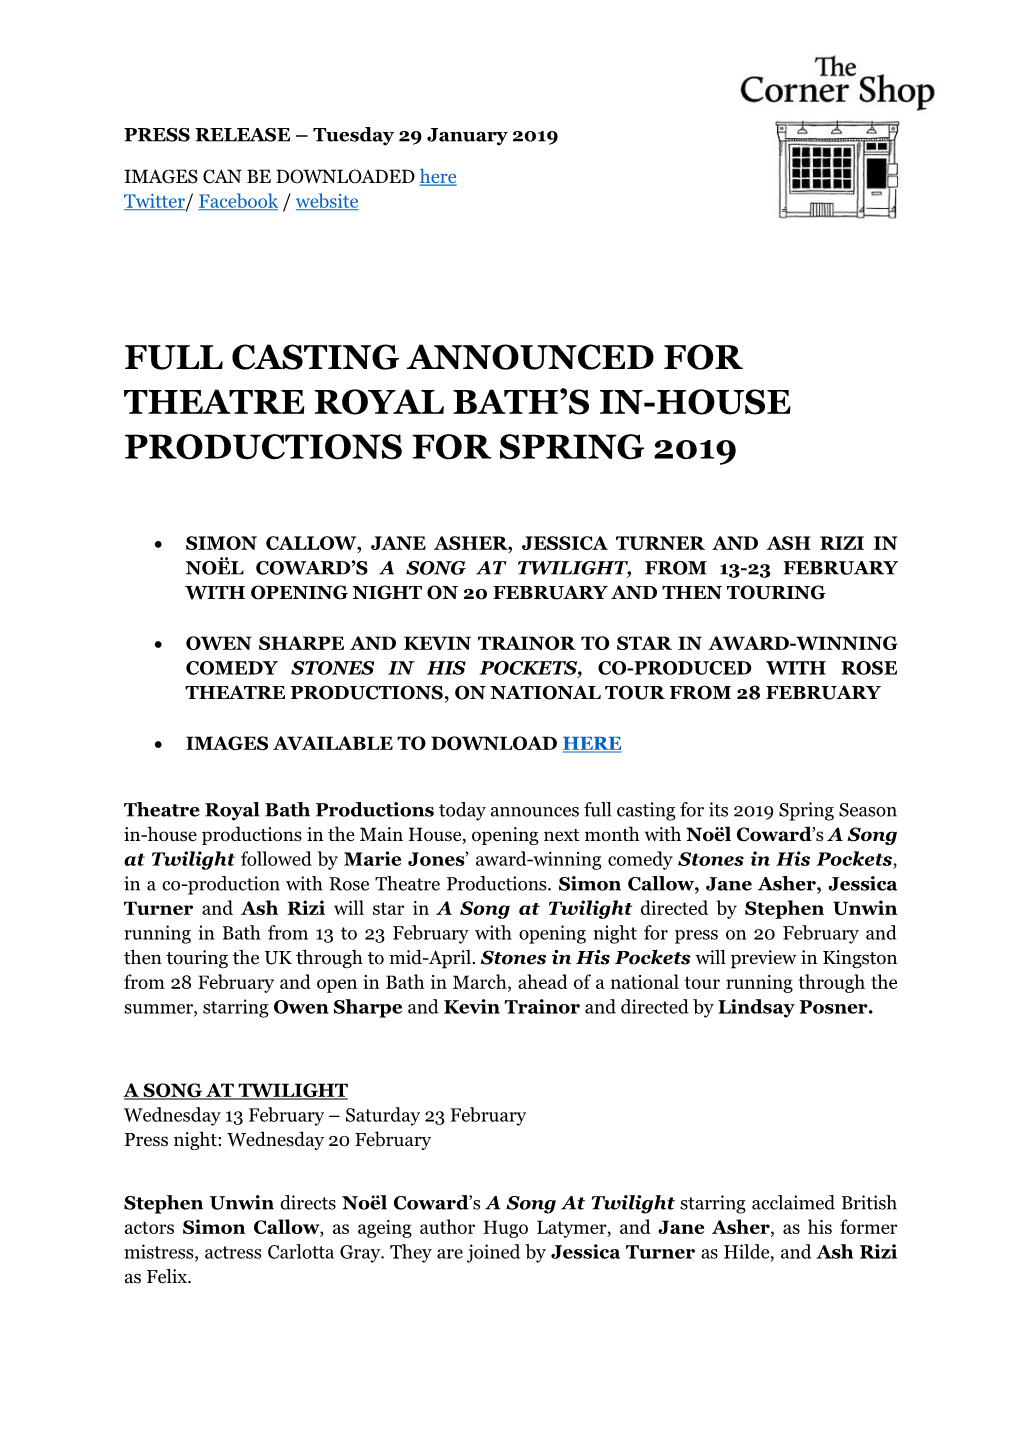 Full Casting Announced for Theatre Royal Bath's In